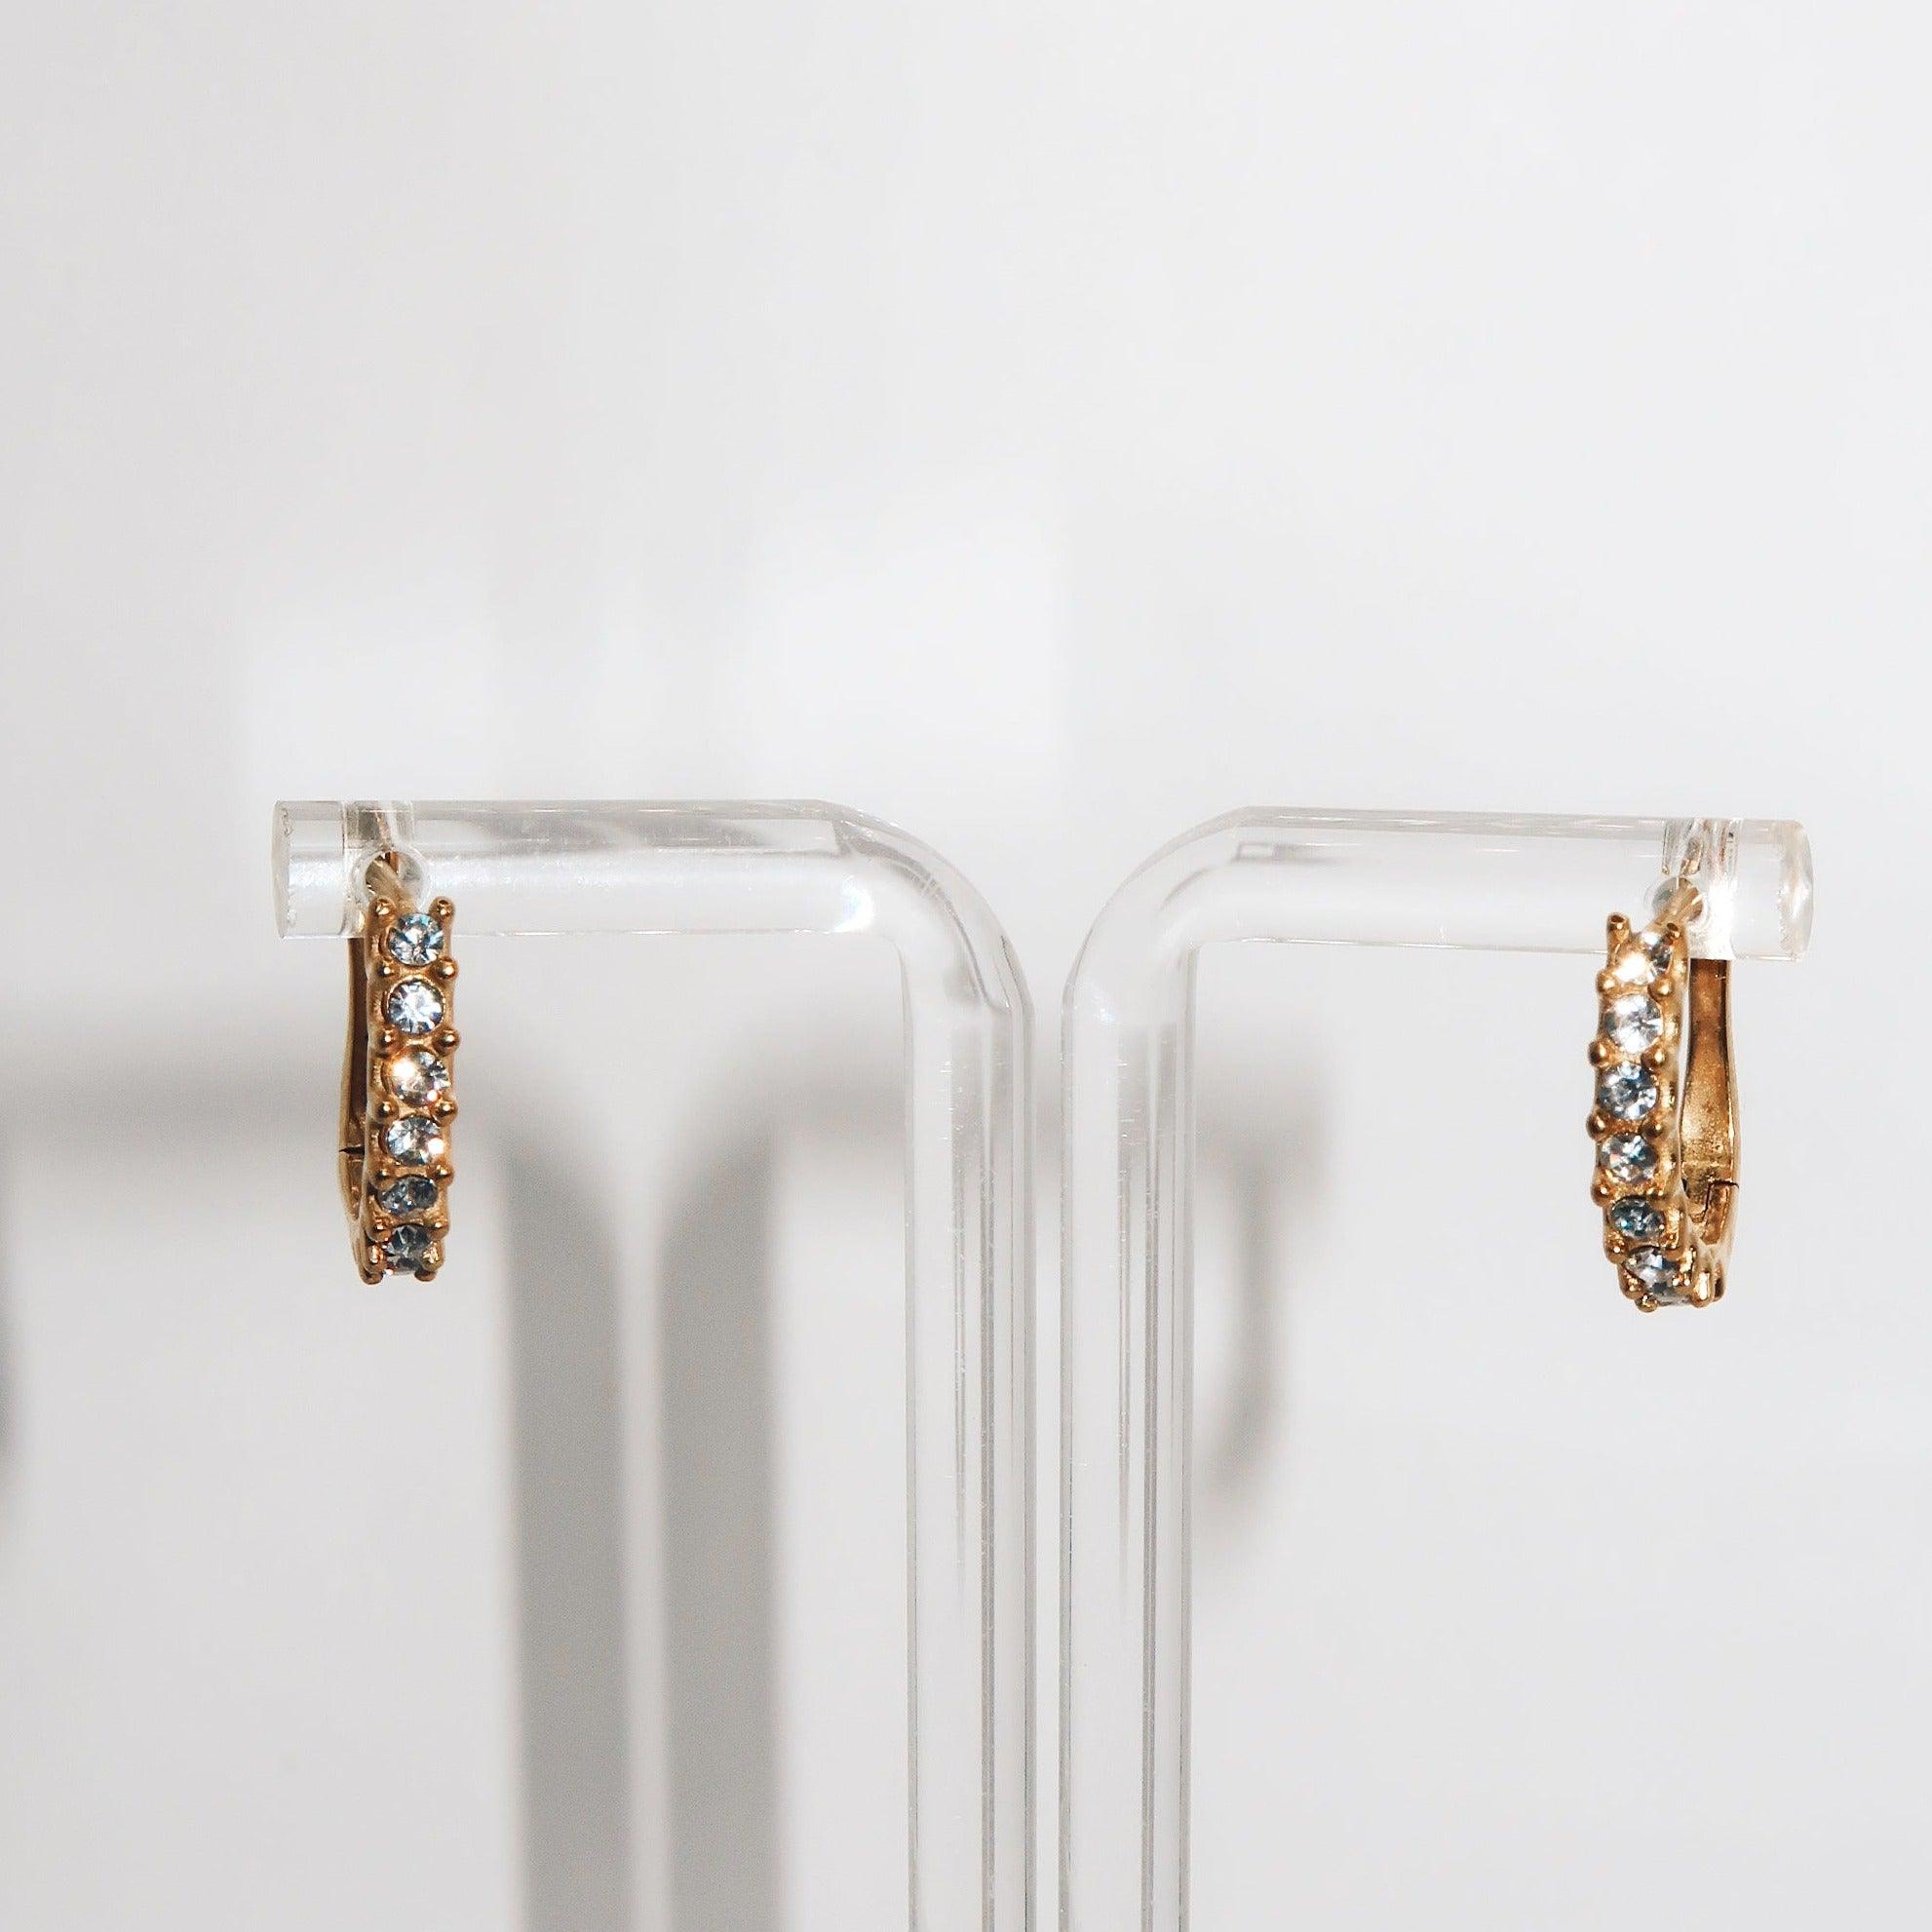 ARIA - 18K PVD Gold Plated CZ Stones Dainty Hoop Earrings with CZ Stones - Mixed Metals